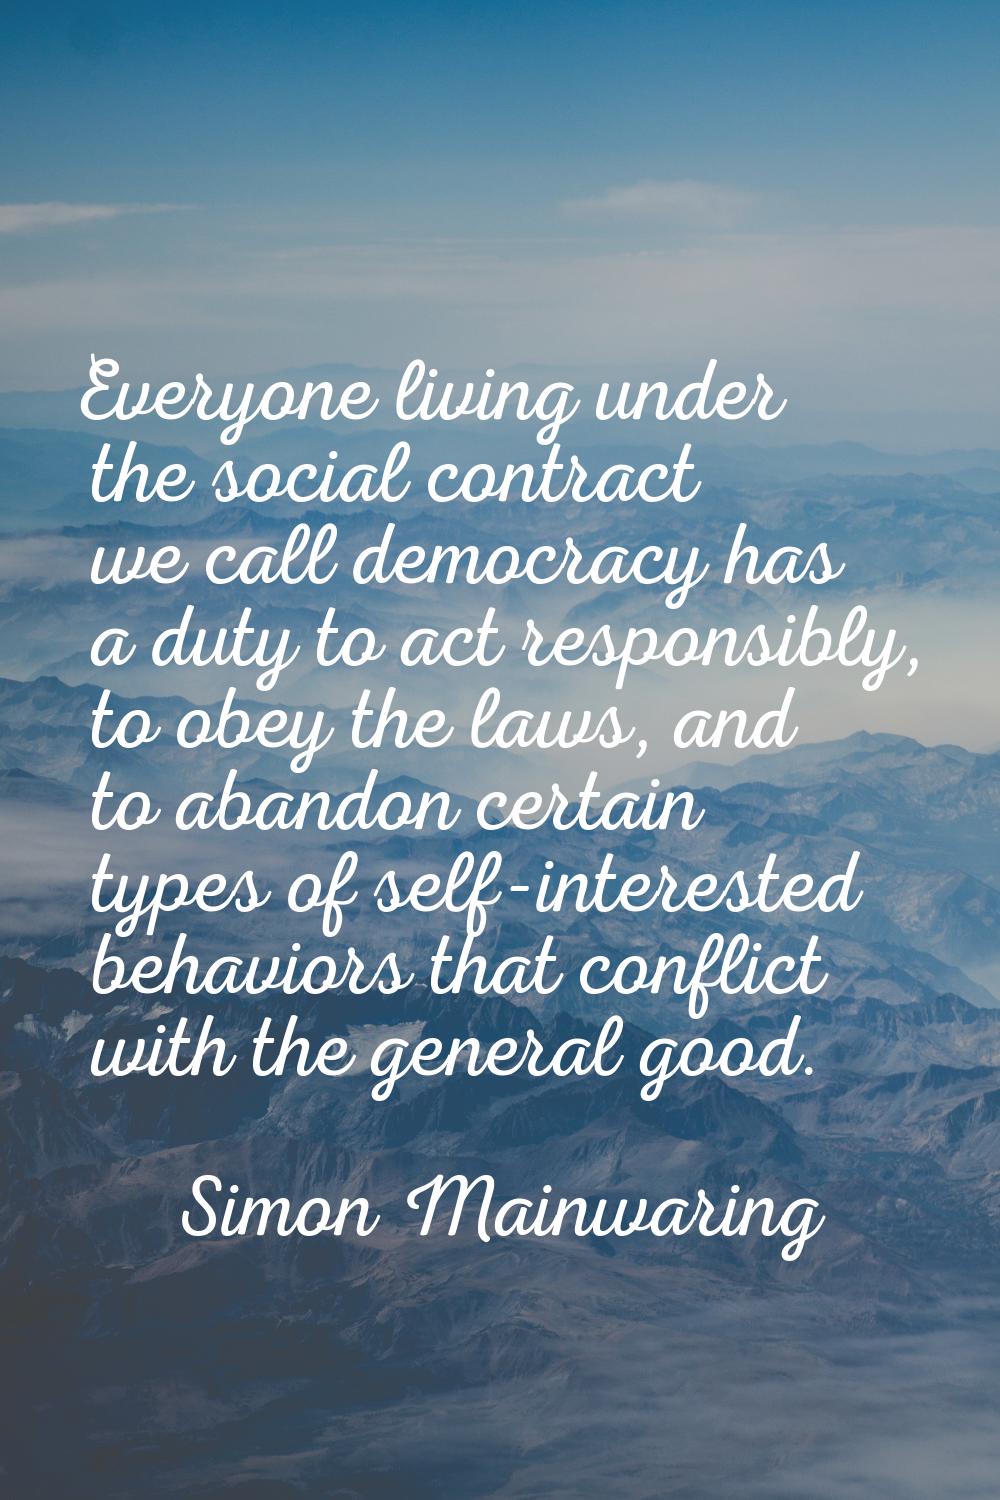 Everyone living under the social contract we call democracy has a duty to act responsibly, to obey 